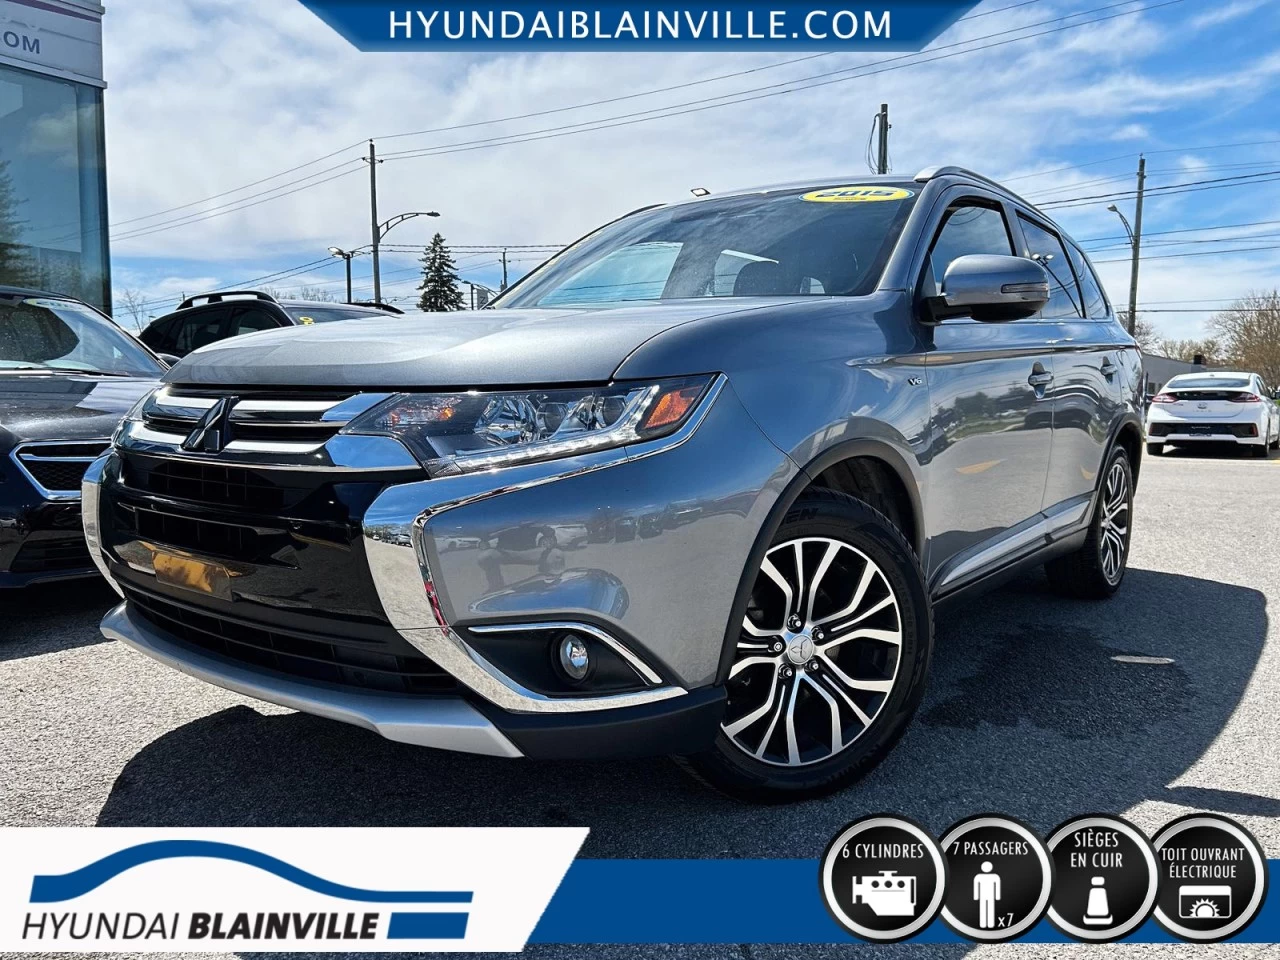 2016 Mitsubishi Outlander GT, V6, AWD, 7 PASSAGERS, CUIR, TOIT OUVRANT+ Image principale